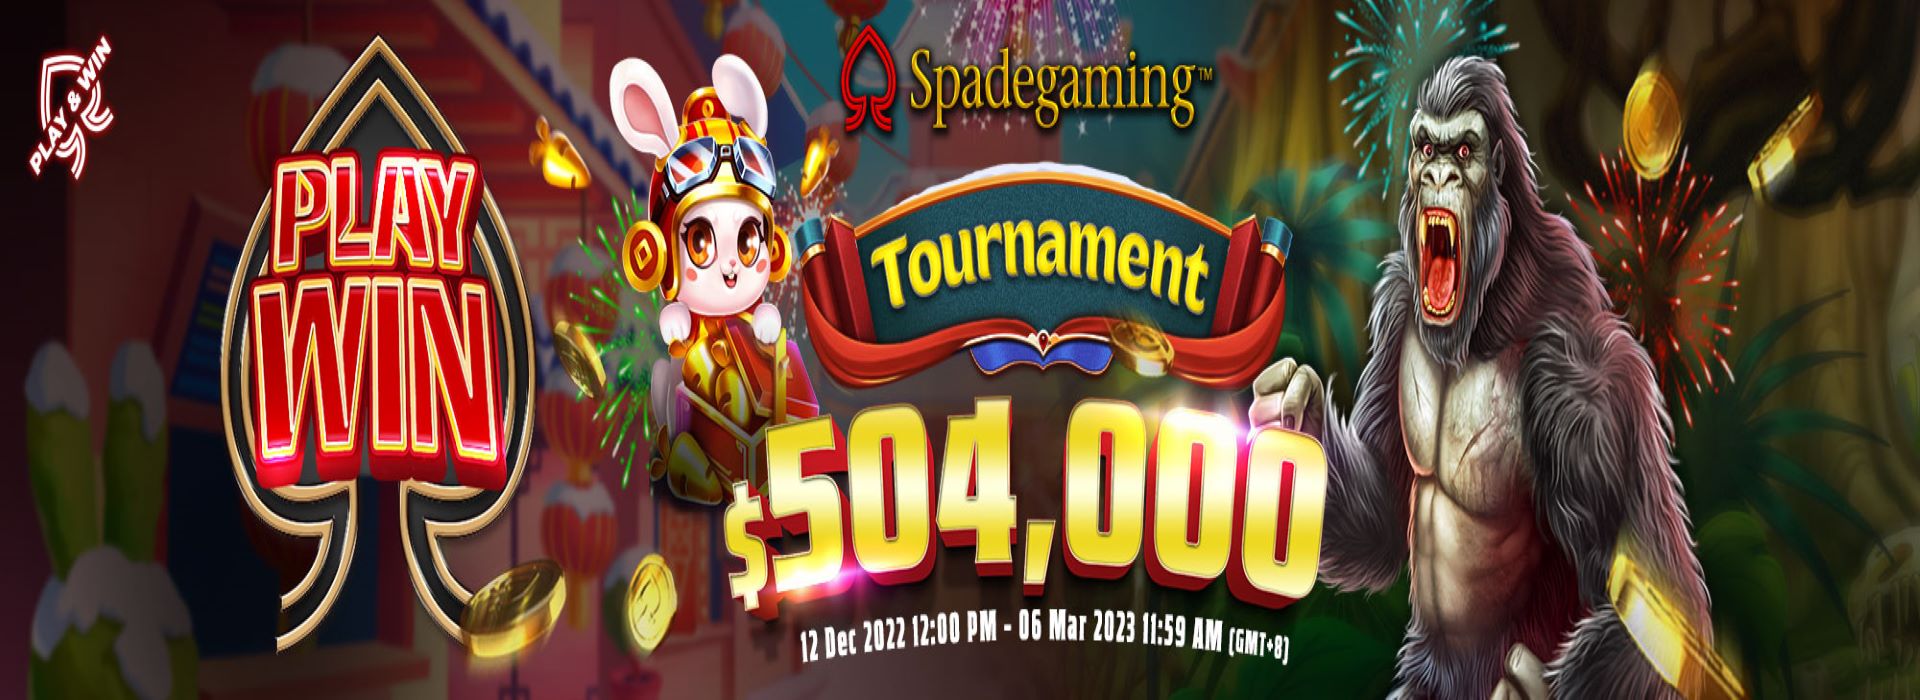 Spadegaming Win Play Tournament! Total Cash Prize Up to $504,000